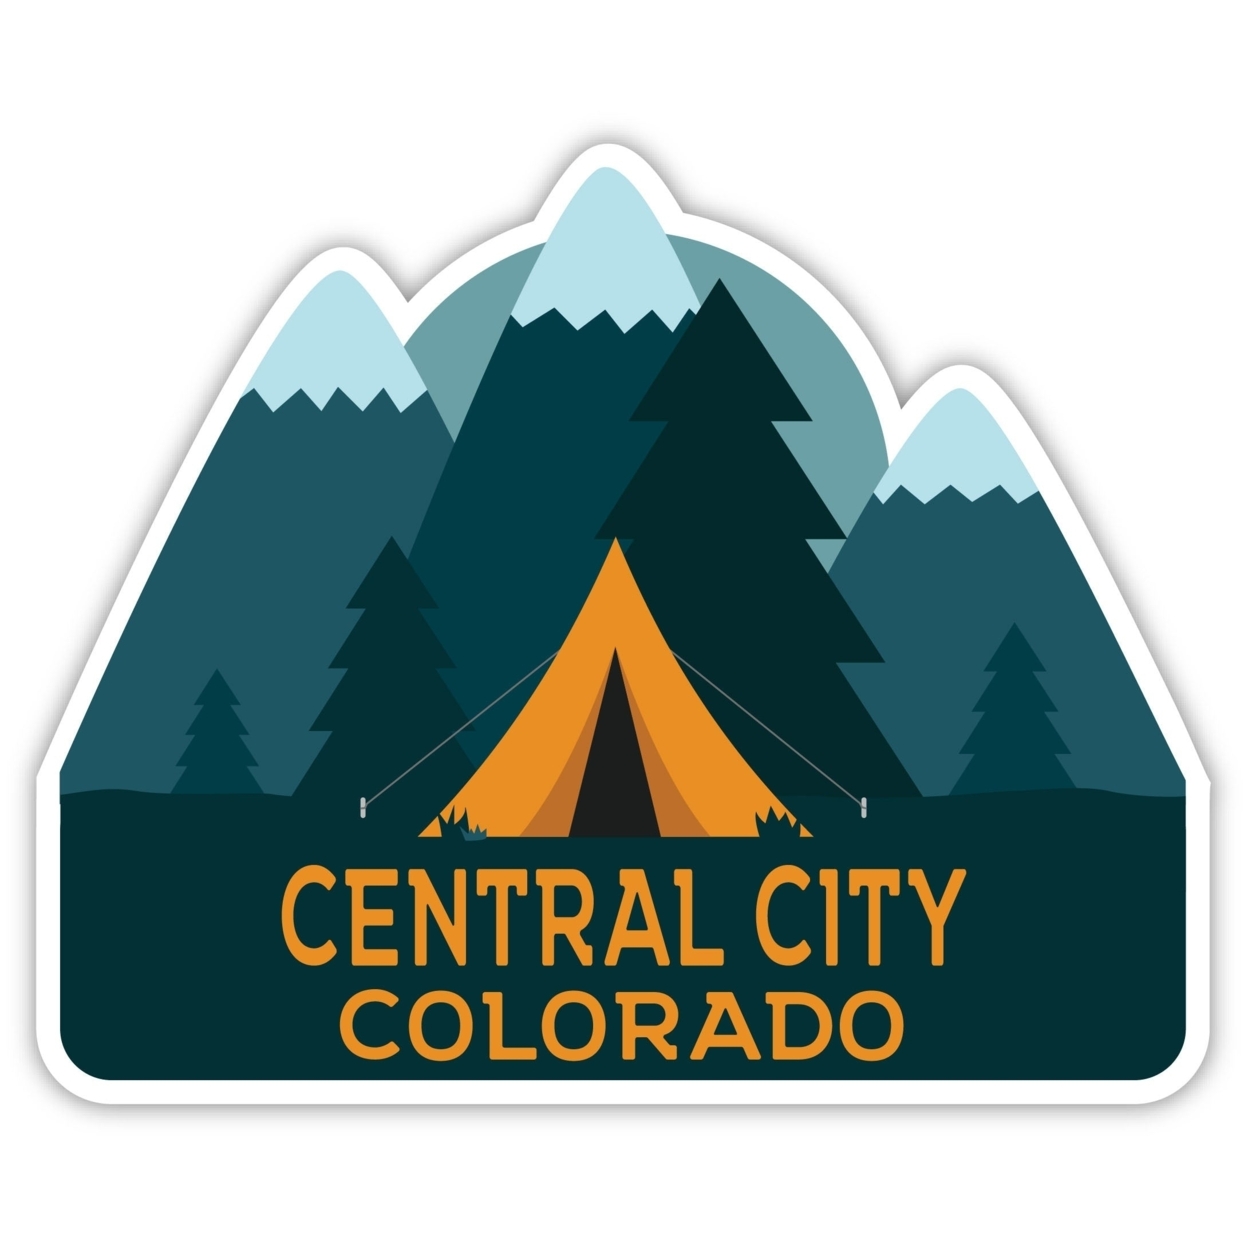 Central City Colorado Souvenir Decorative Stickers (Choose Theme And Size) - 4-Pack, 2-Inch, Tent